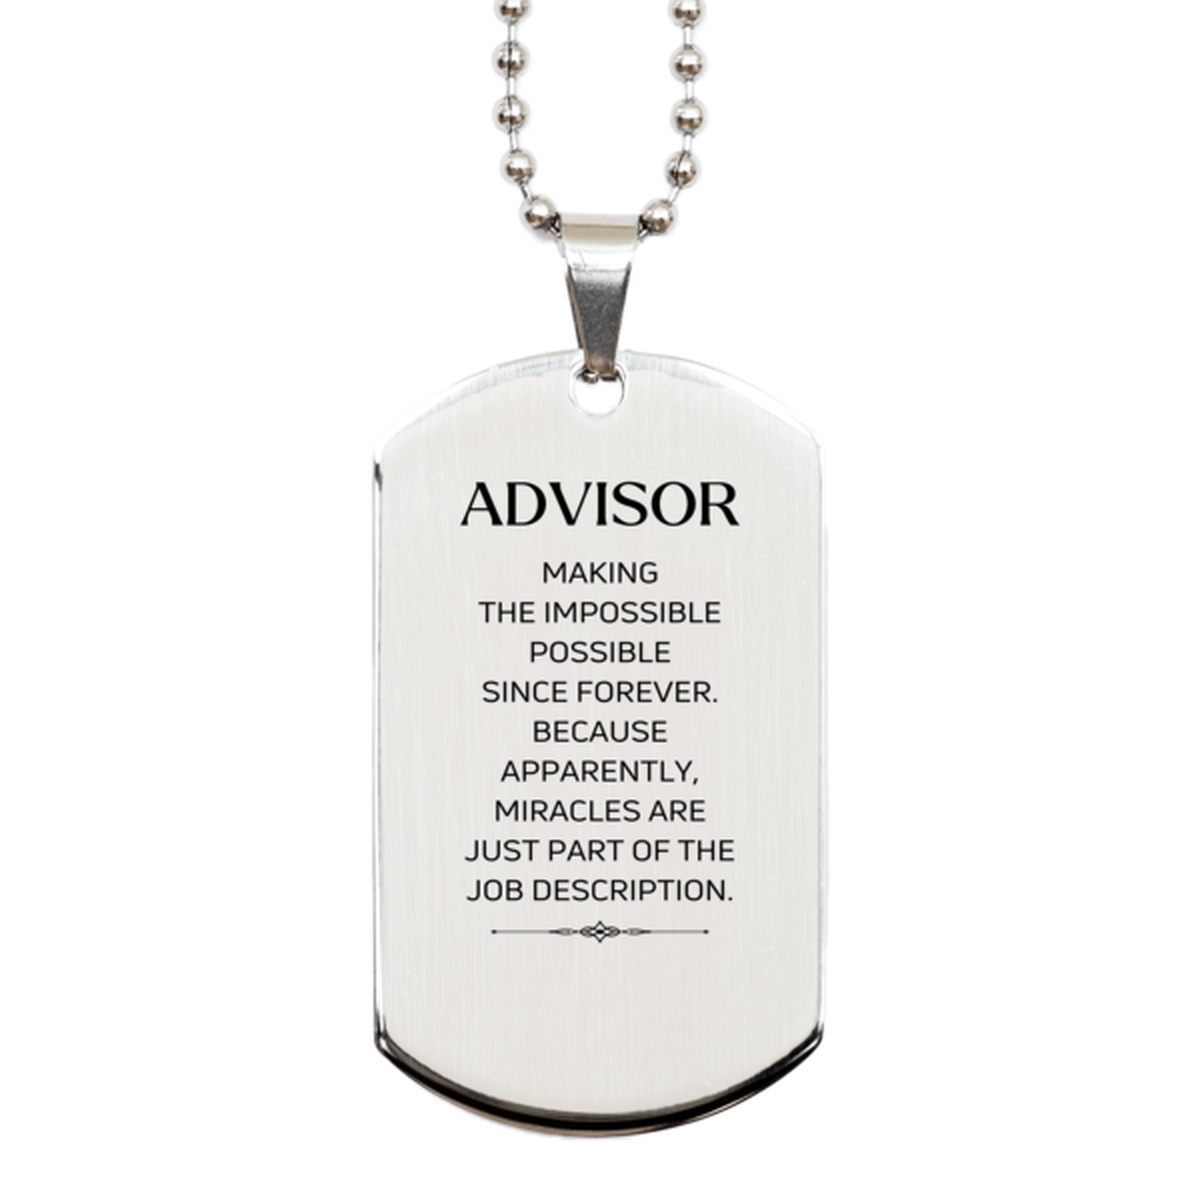 Funny Advisor Gifts, Miracles are just part of the job description, Inspirational Birthday Silver Dog Tag For Advisor, Men, Women, Coworkers, Friends, Boss